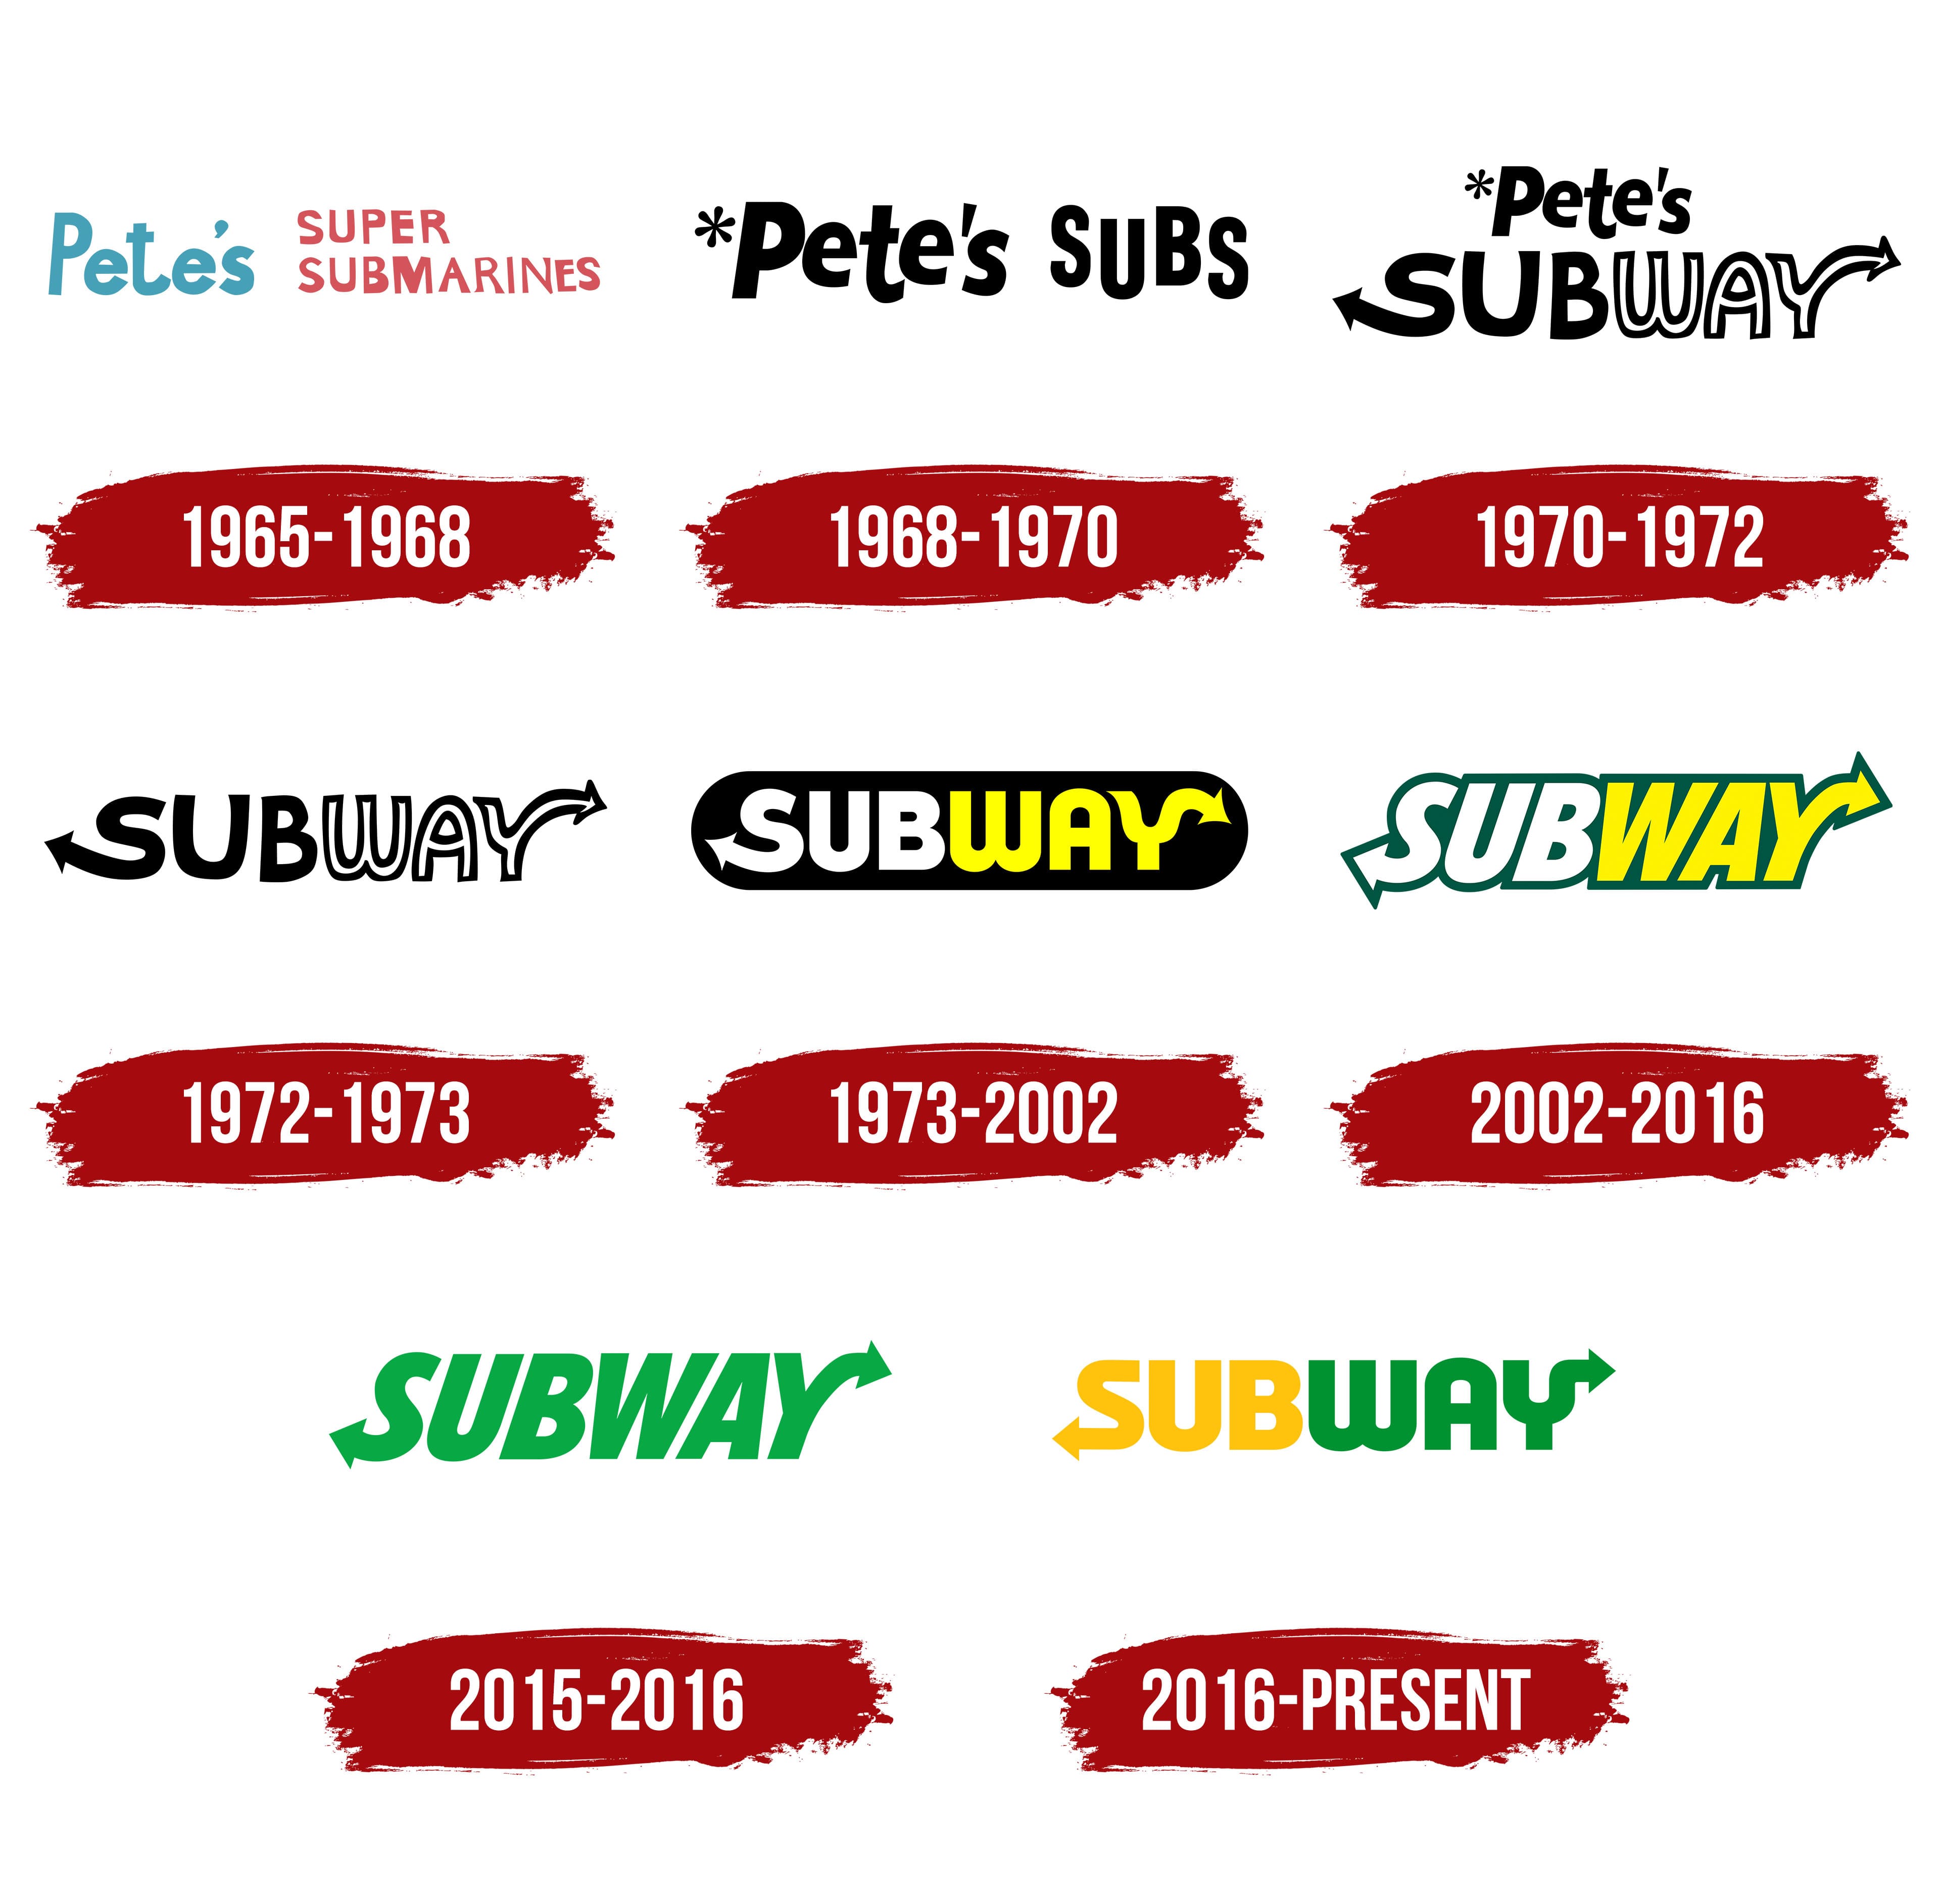 After 15 years, Subway has a brand new logo